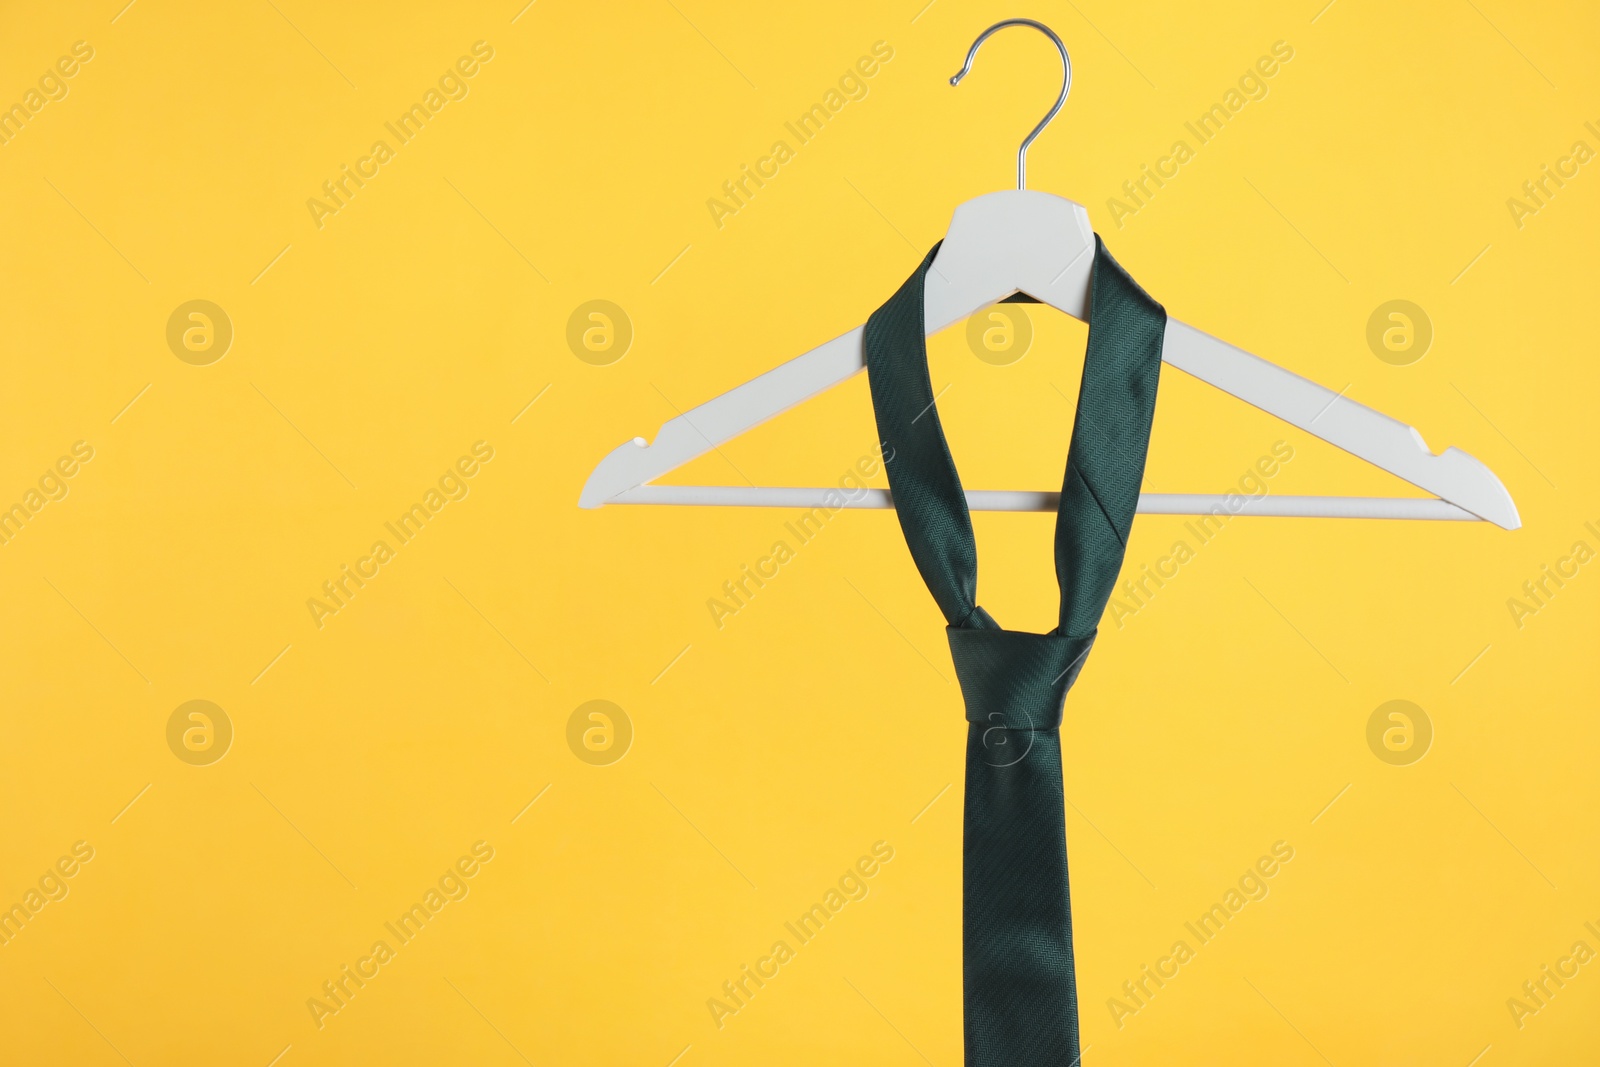 Photo of Hanger with black tie against orange background. Space for text